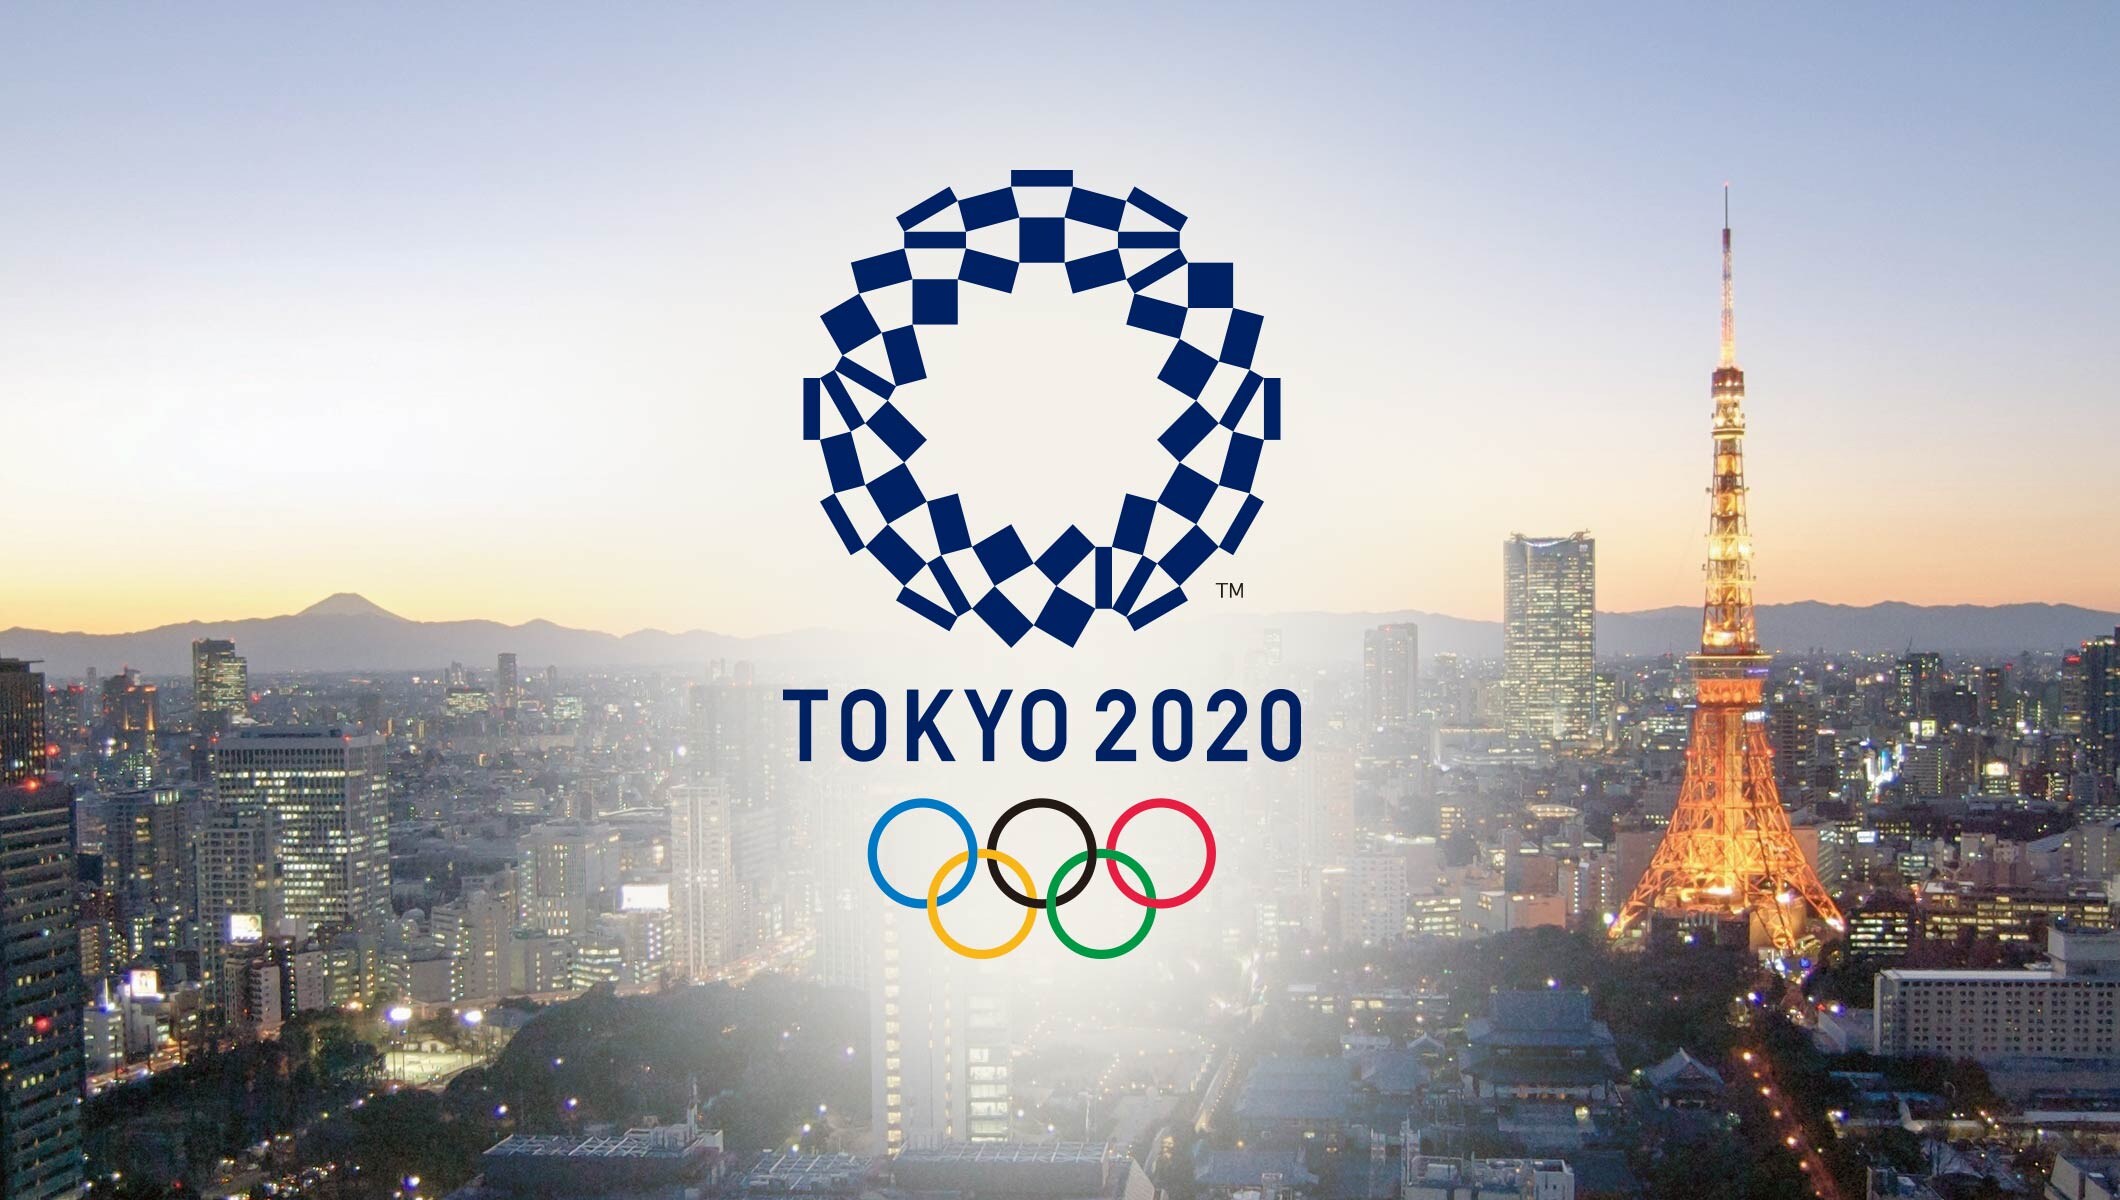 Tokyo 2020 event programme to see major boost for female participation,  youth and urban appeal - Olympic News